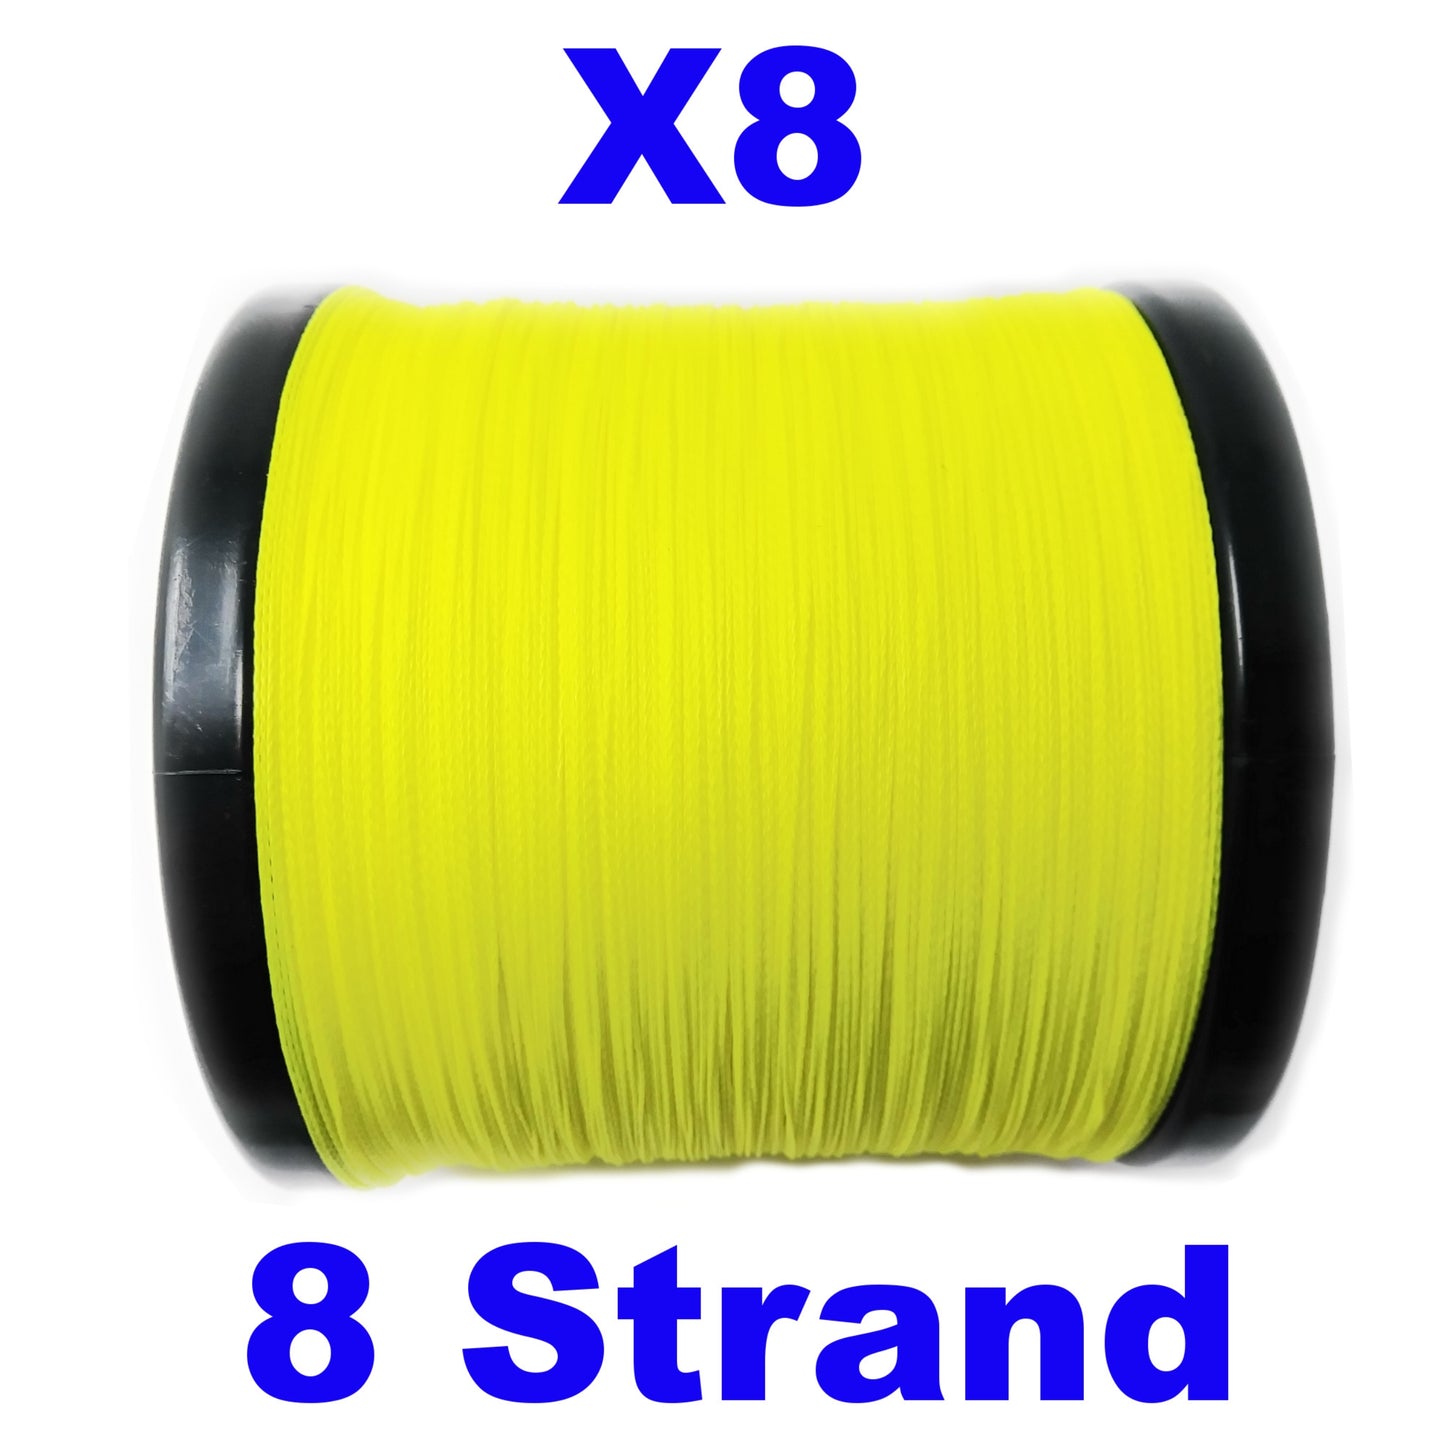 Reaction Tackle Braided Fishing Line - Pro Grade Power Performance for Saltwater or Freshwater Fish - Colored Fishing Line Braid for Extra Visibility